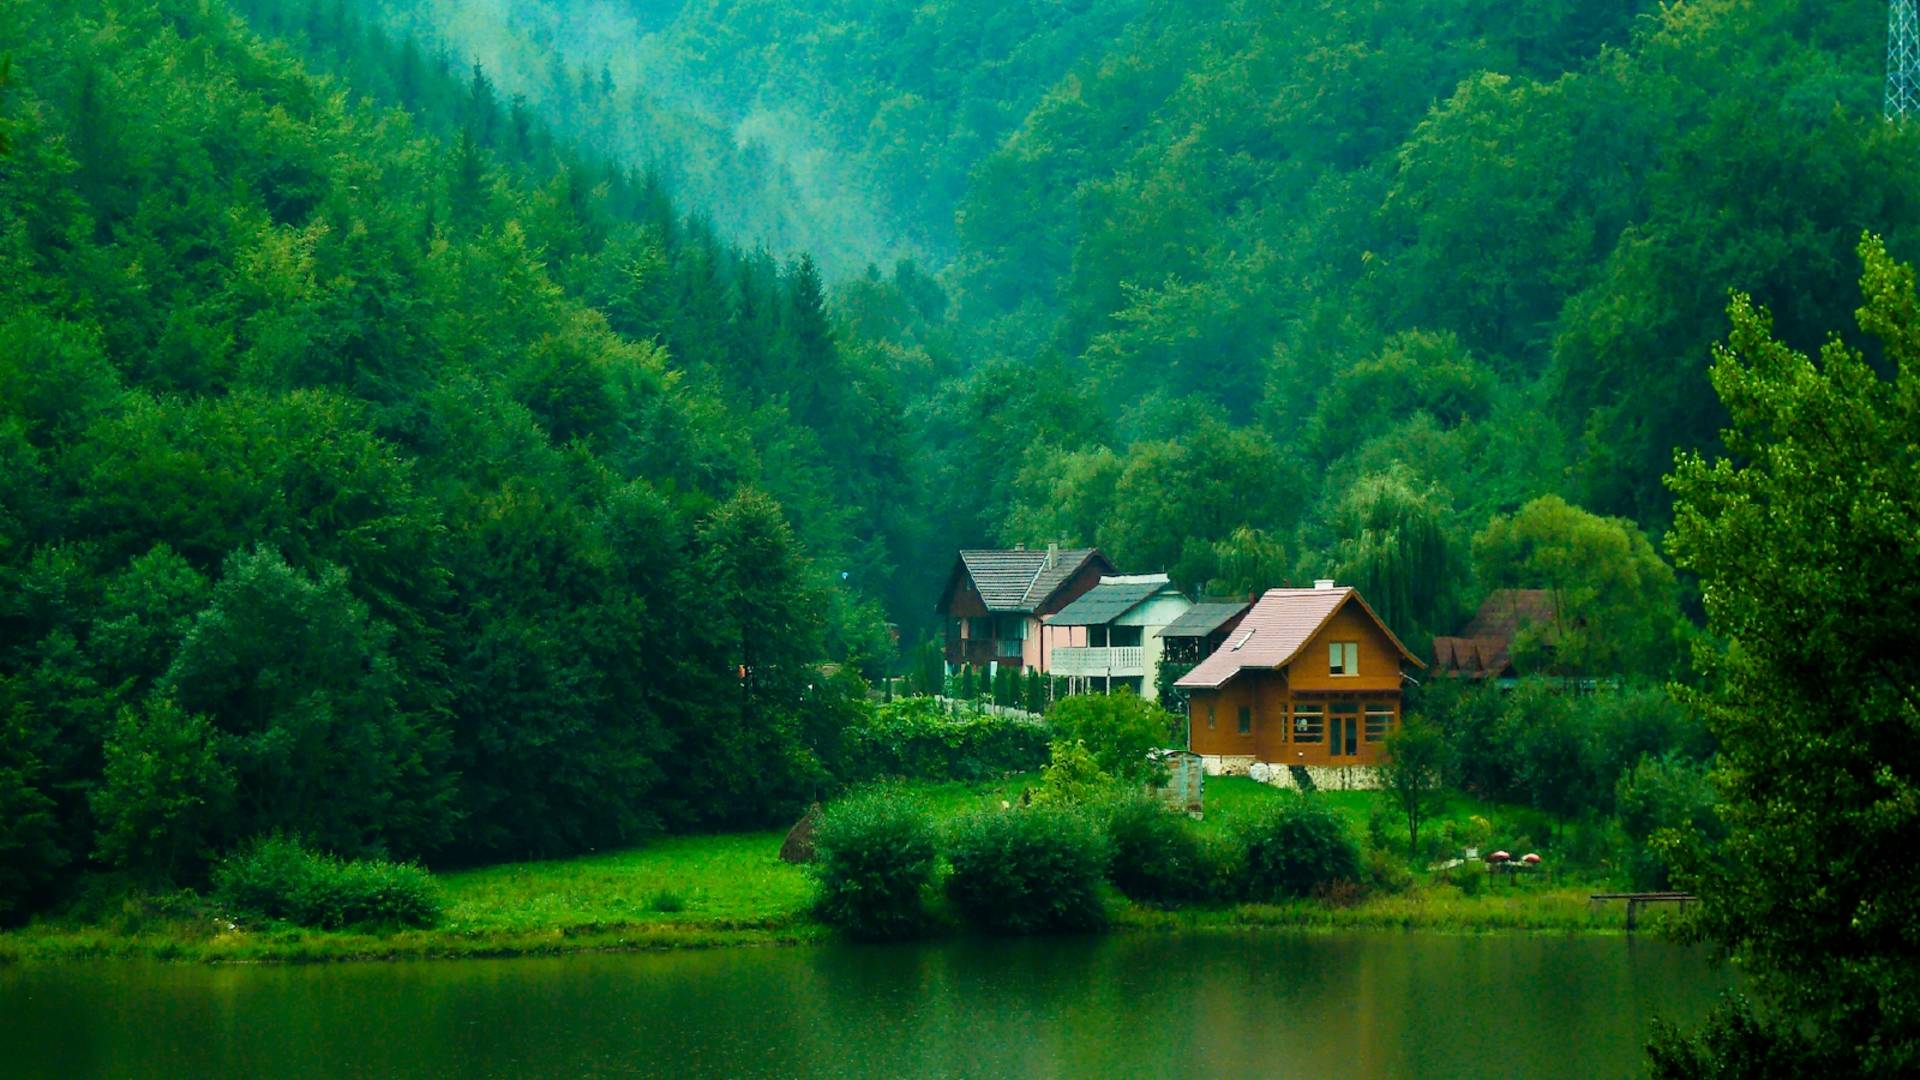 House In The Green Mountain Stunning Scenery Wallpaper ~ Clipgoo